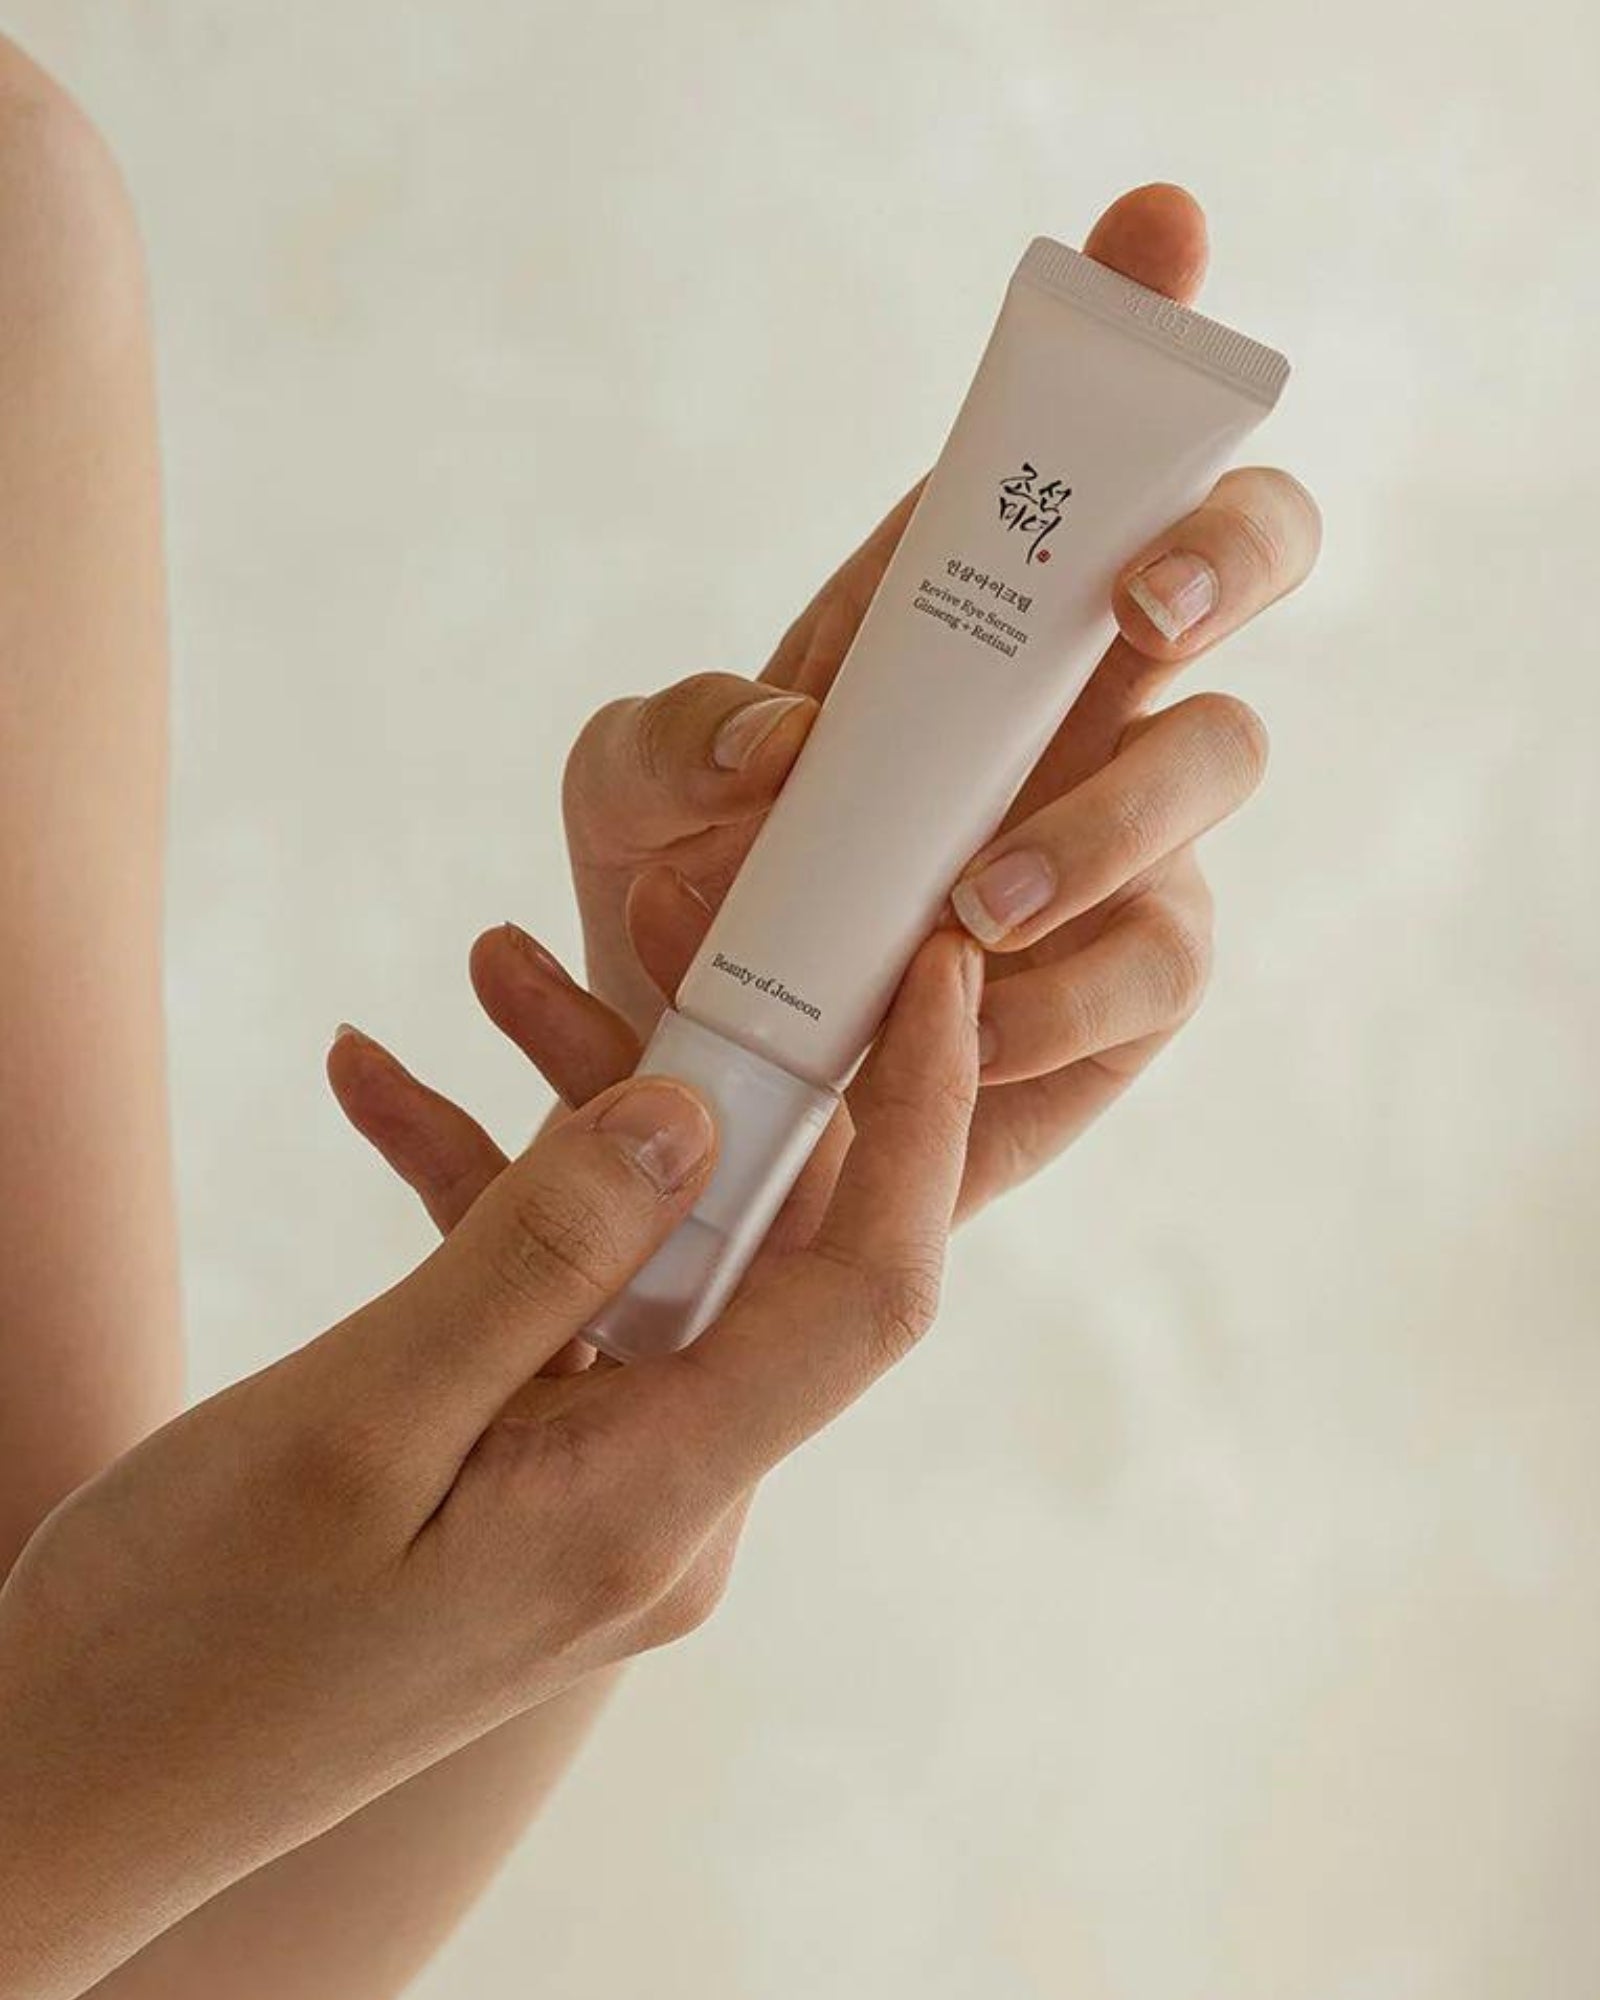 BEAUTY OF JOSEON'S REVIVE EYE SERUM: DOES IT LIVE UP TO THE HYPE?